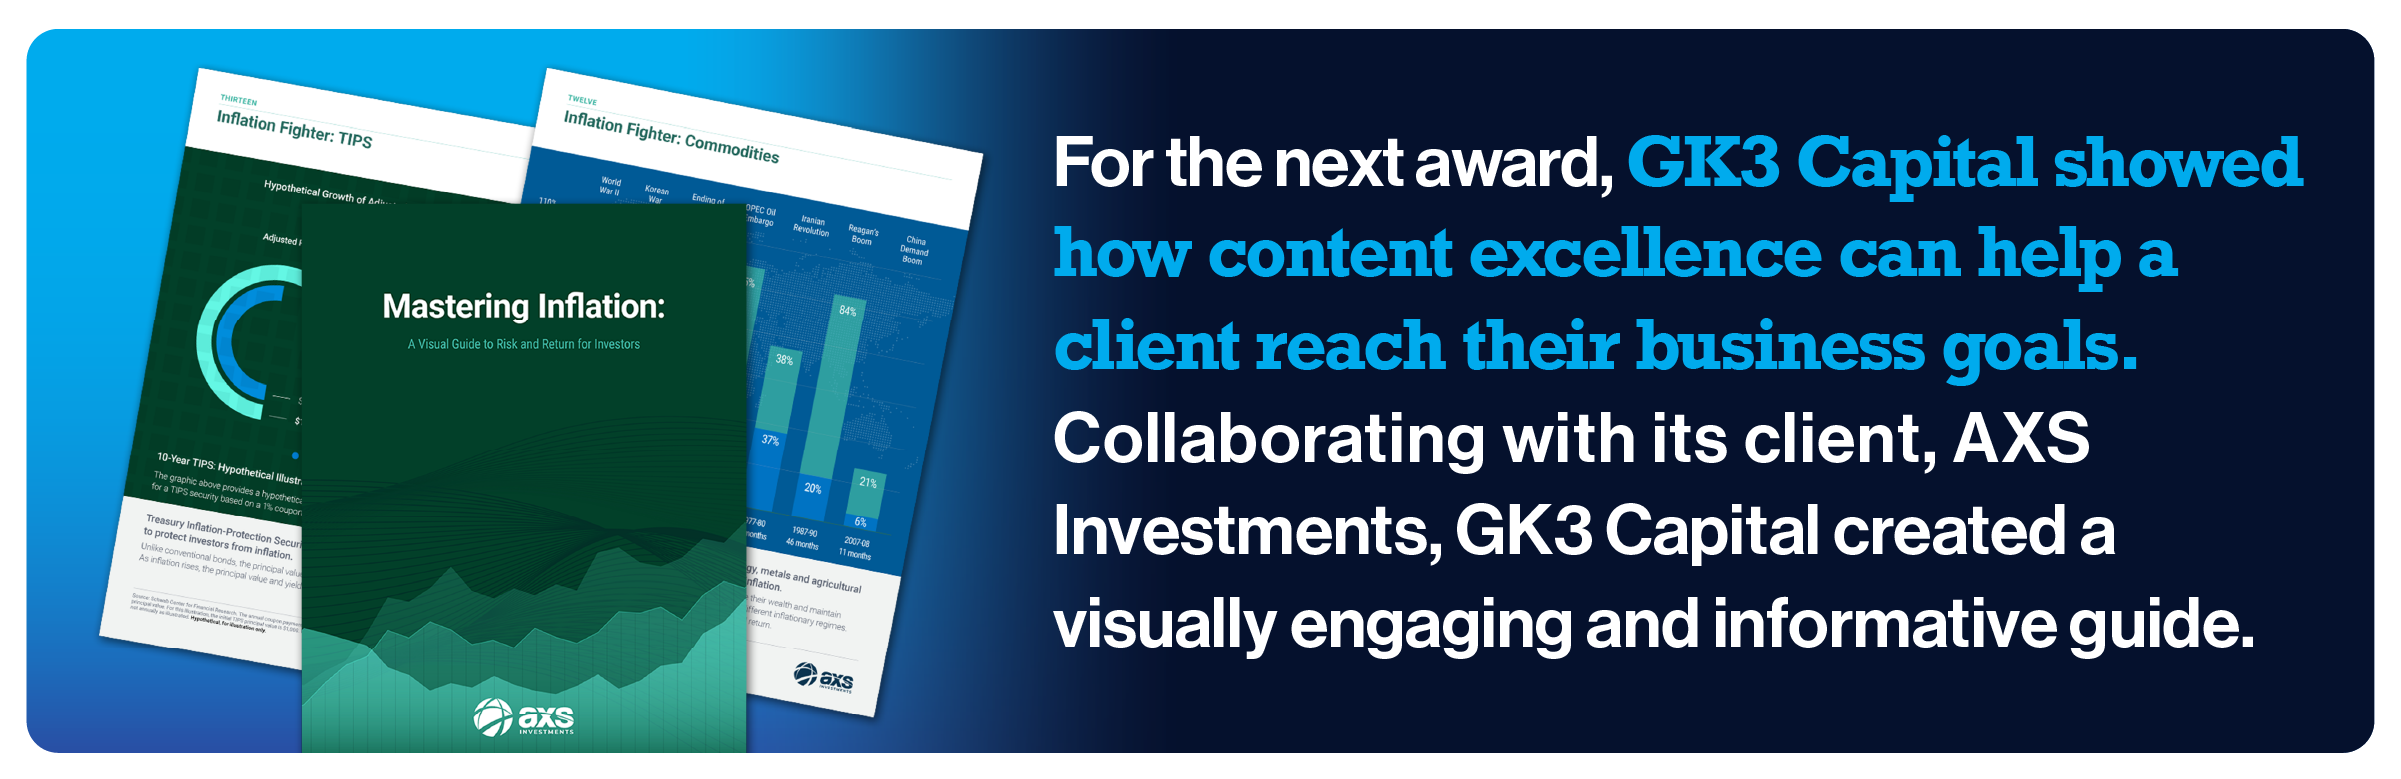 38015 GK3 Blog- Content Awards graphic 4